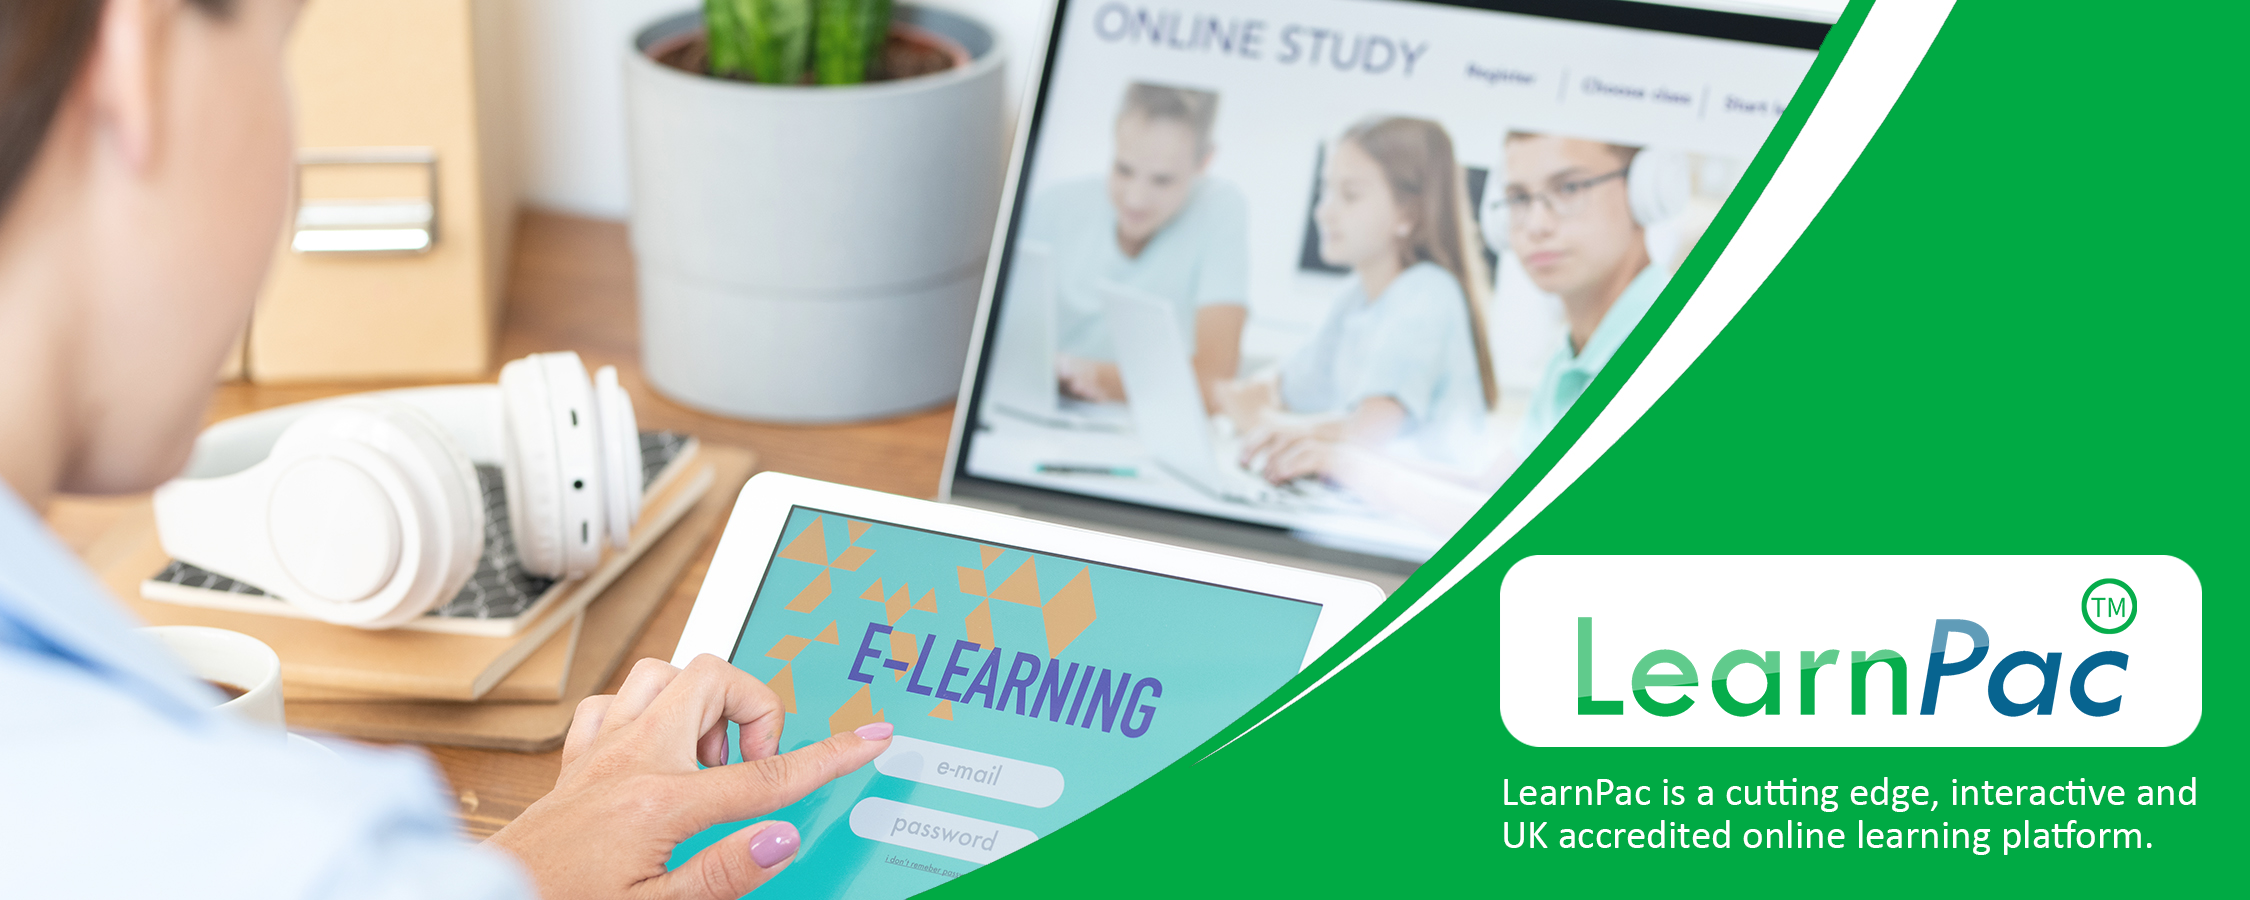 Equality, Diversity and Inclusion - Online Learning Courses - E-Learning Courses - LearnPac Systems UK -